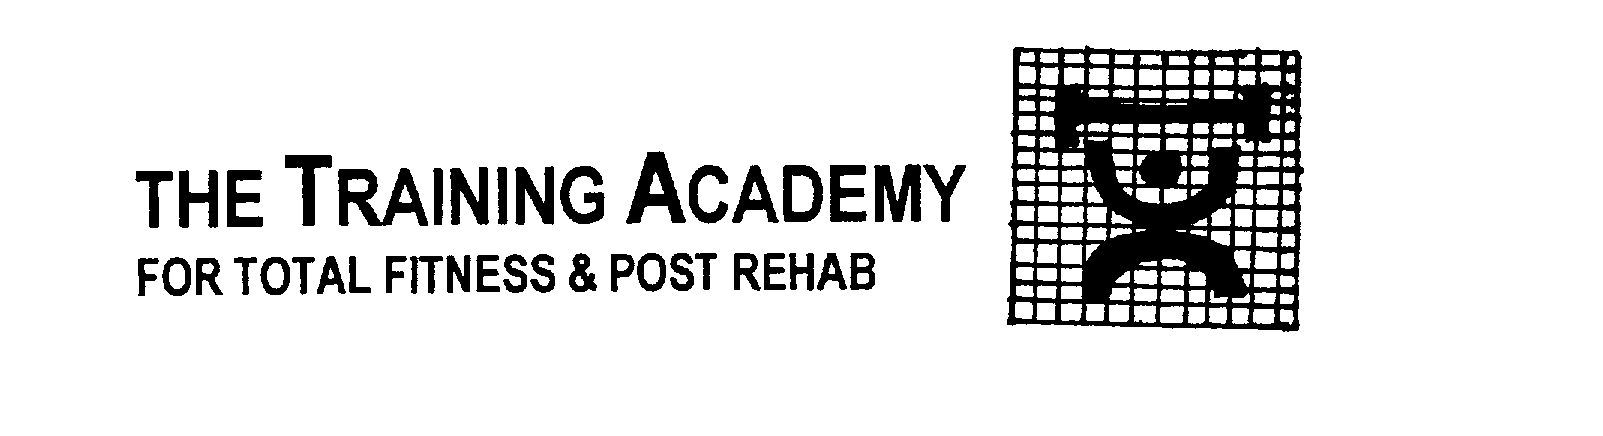 Trademark Logo THE TRAINING ACADEMY FOR TOTAL FITNESS & POST REHAB